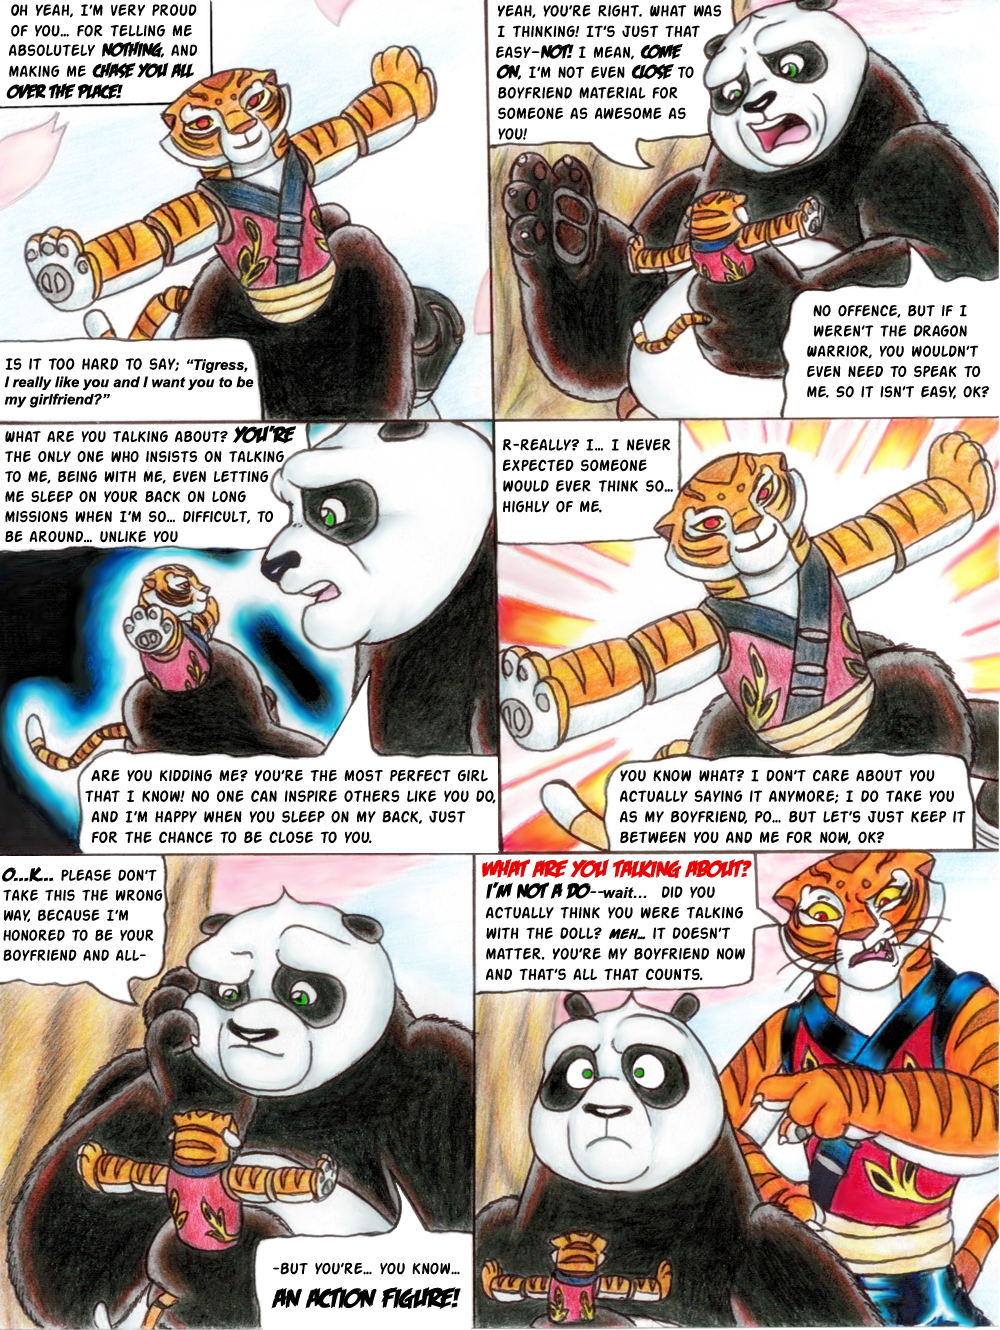 20 best Kung Fu Panda images by Bwall7204 on Pinterest 